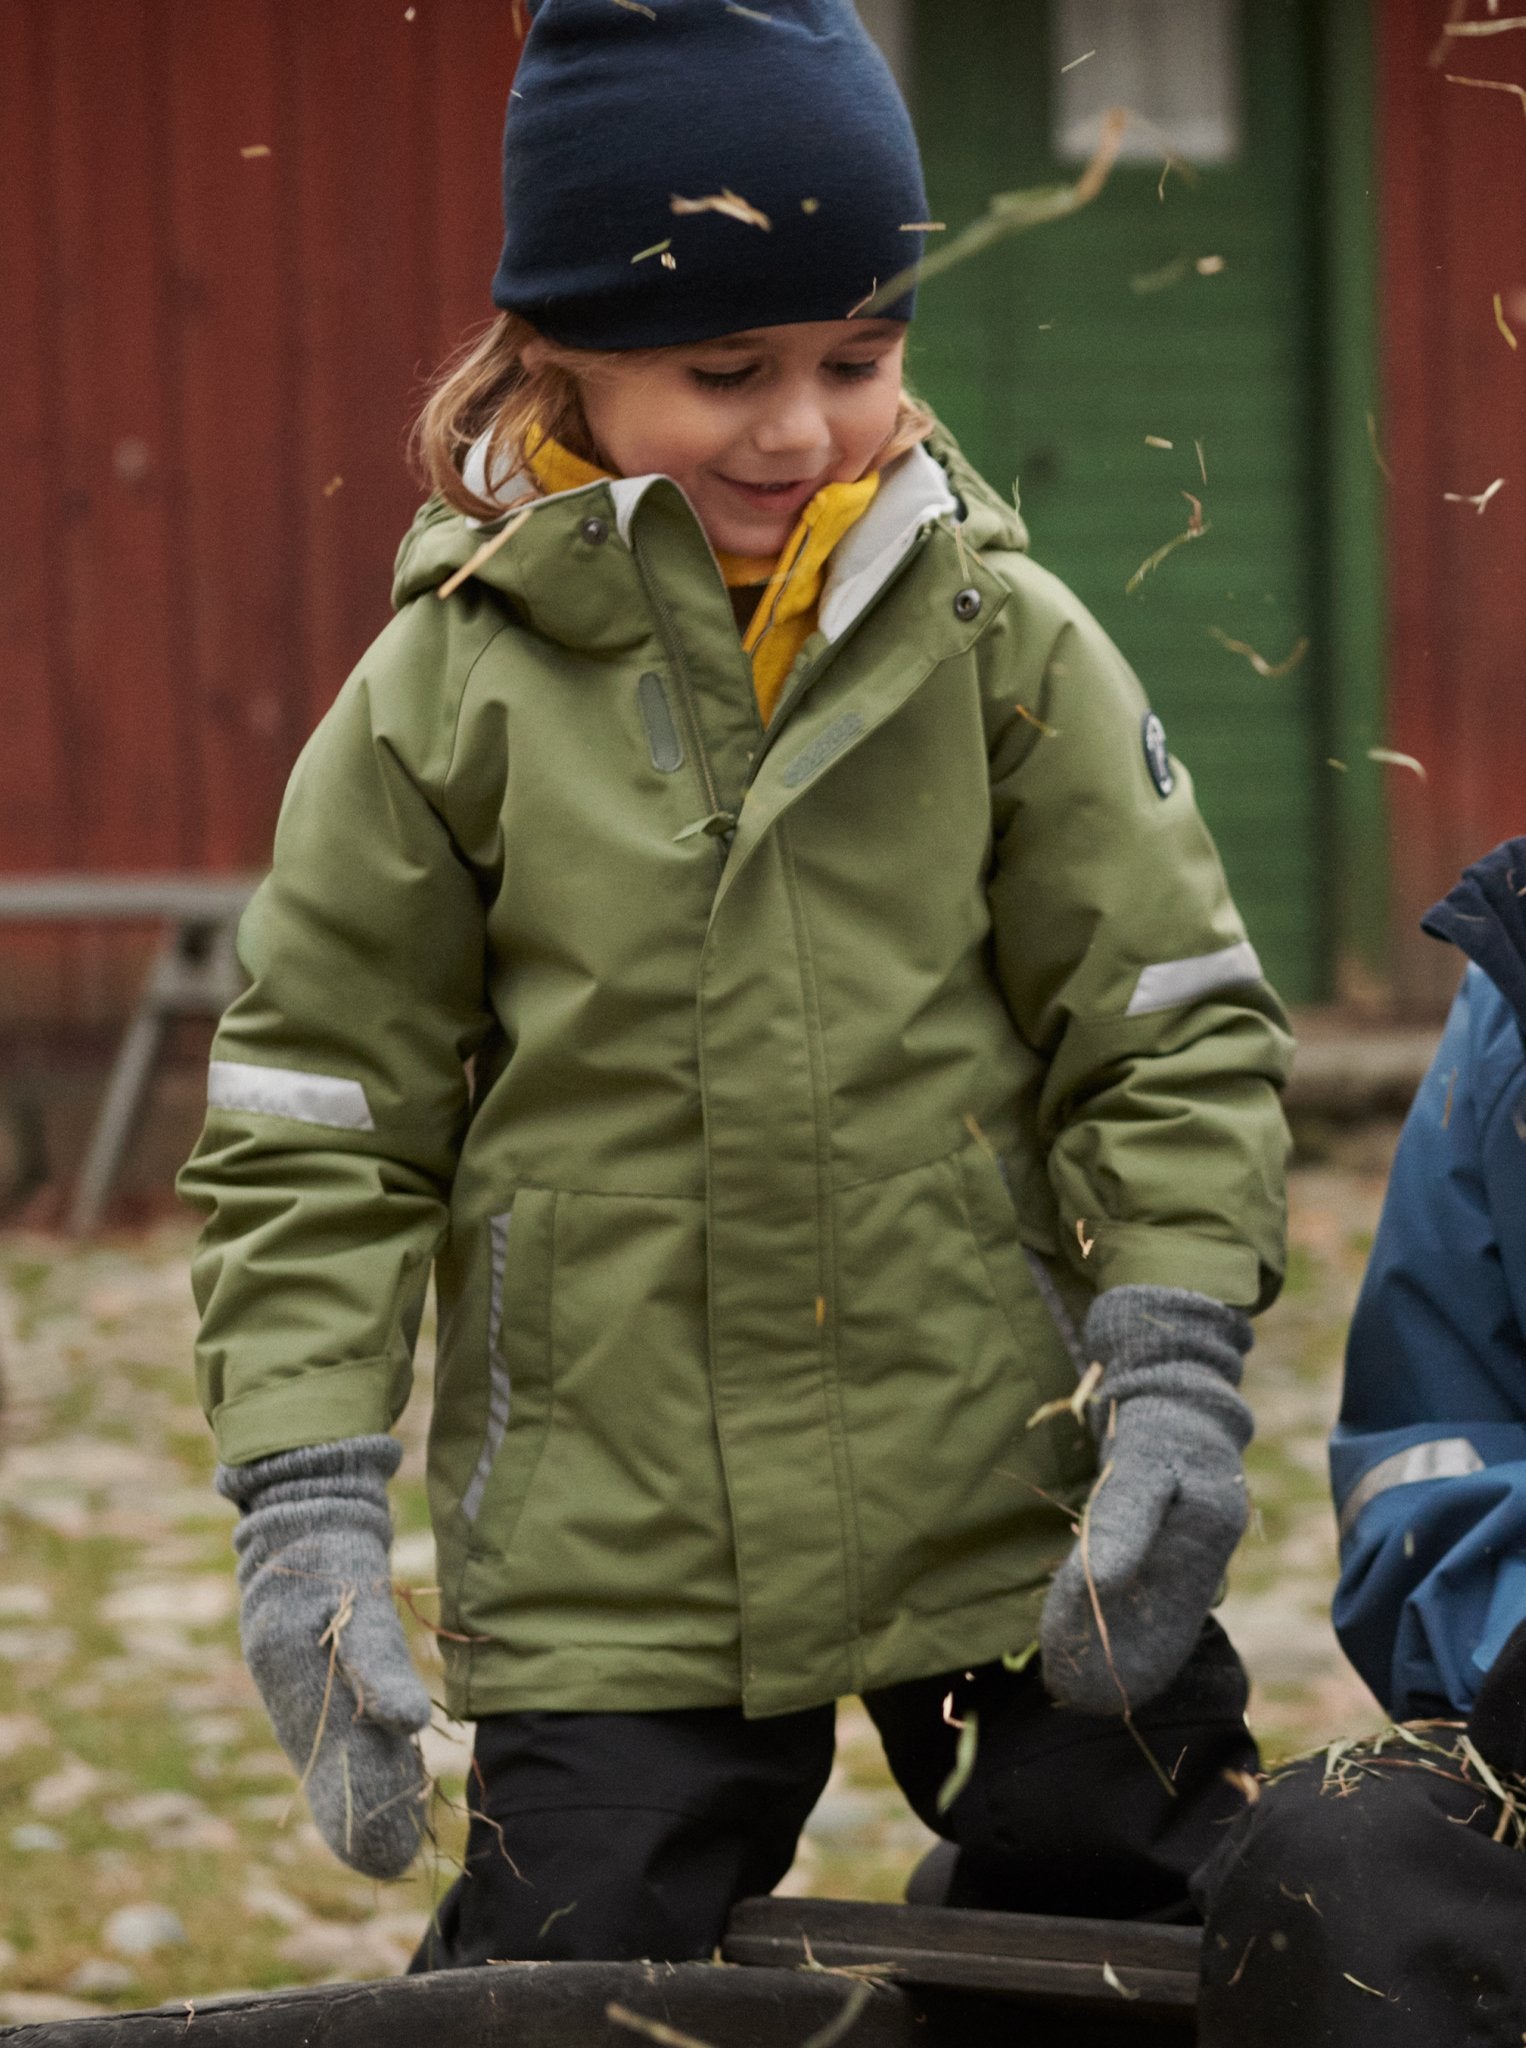 Girl playing outside wearing 100% waterproof kids coat in green and 100% waterproof trousers in black. Accessories with warm merino wool beanie hat in navy and grey wool gloves